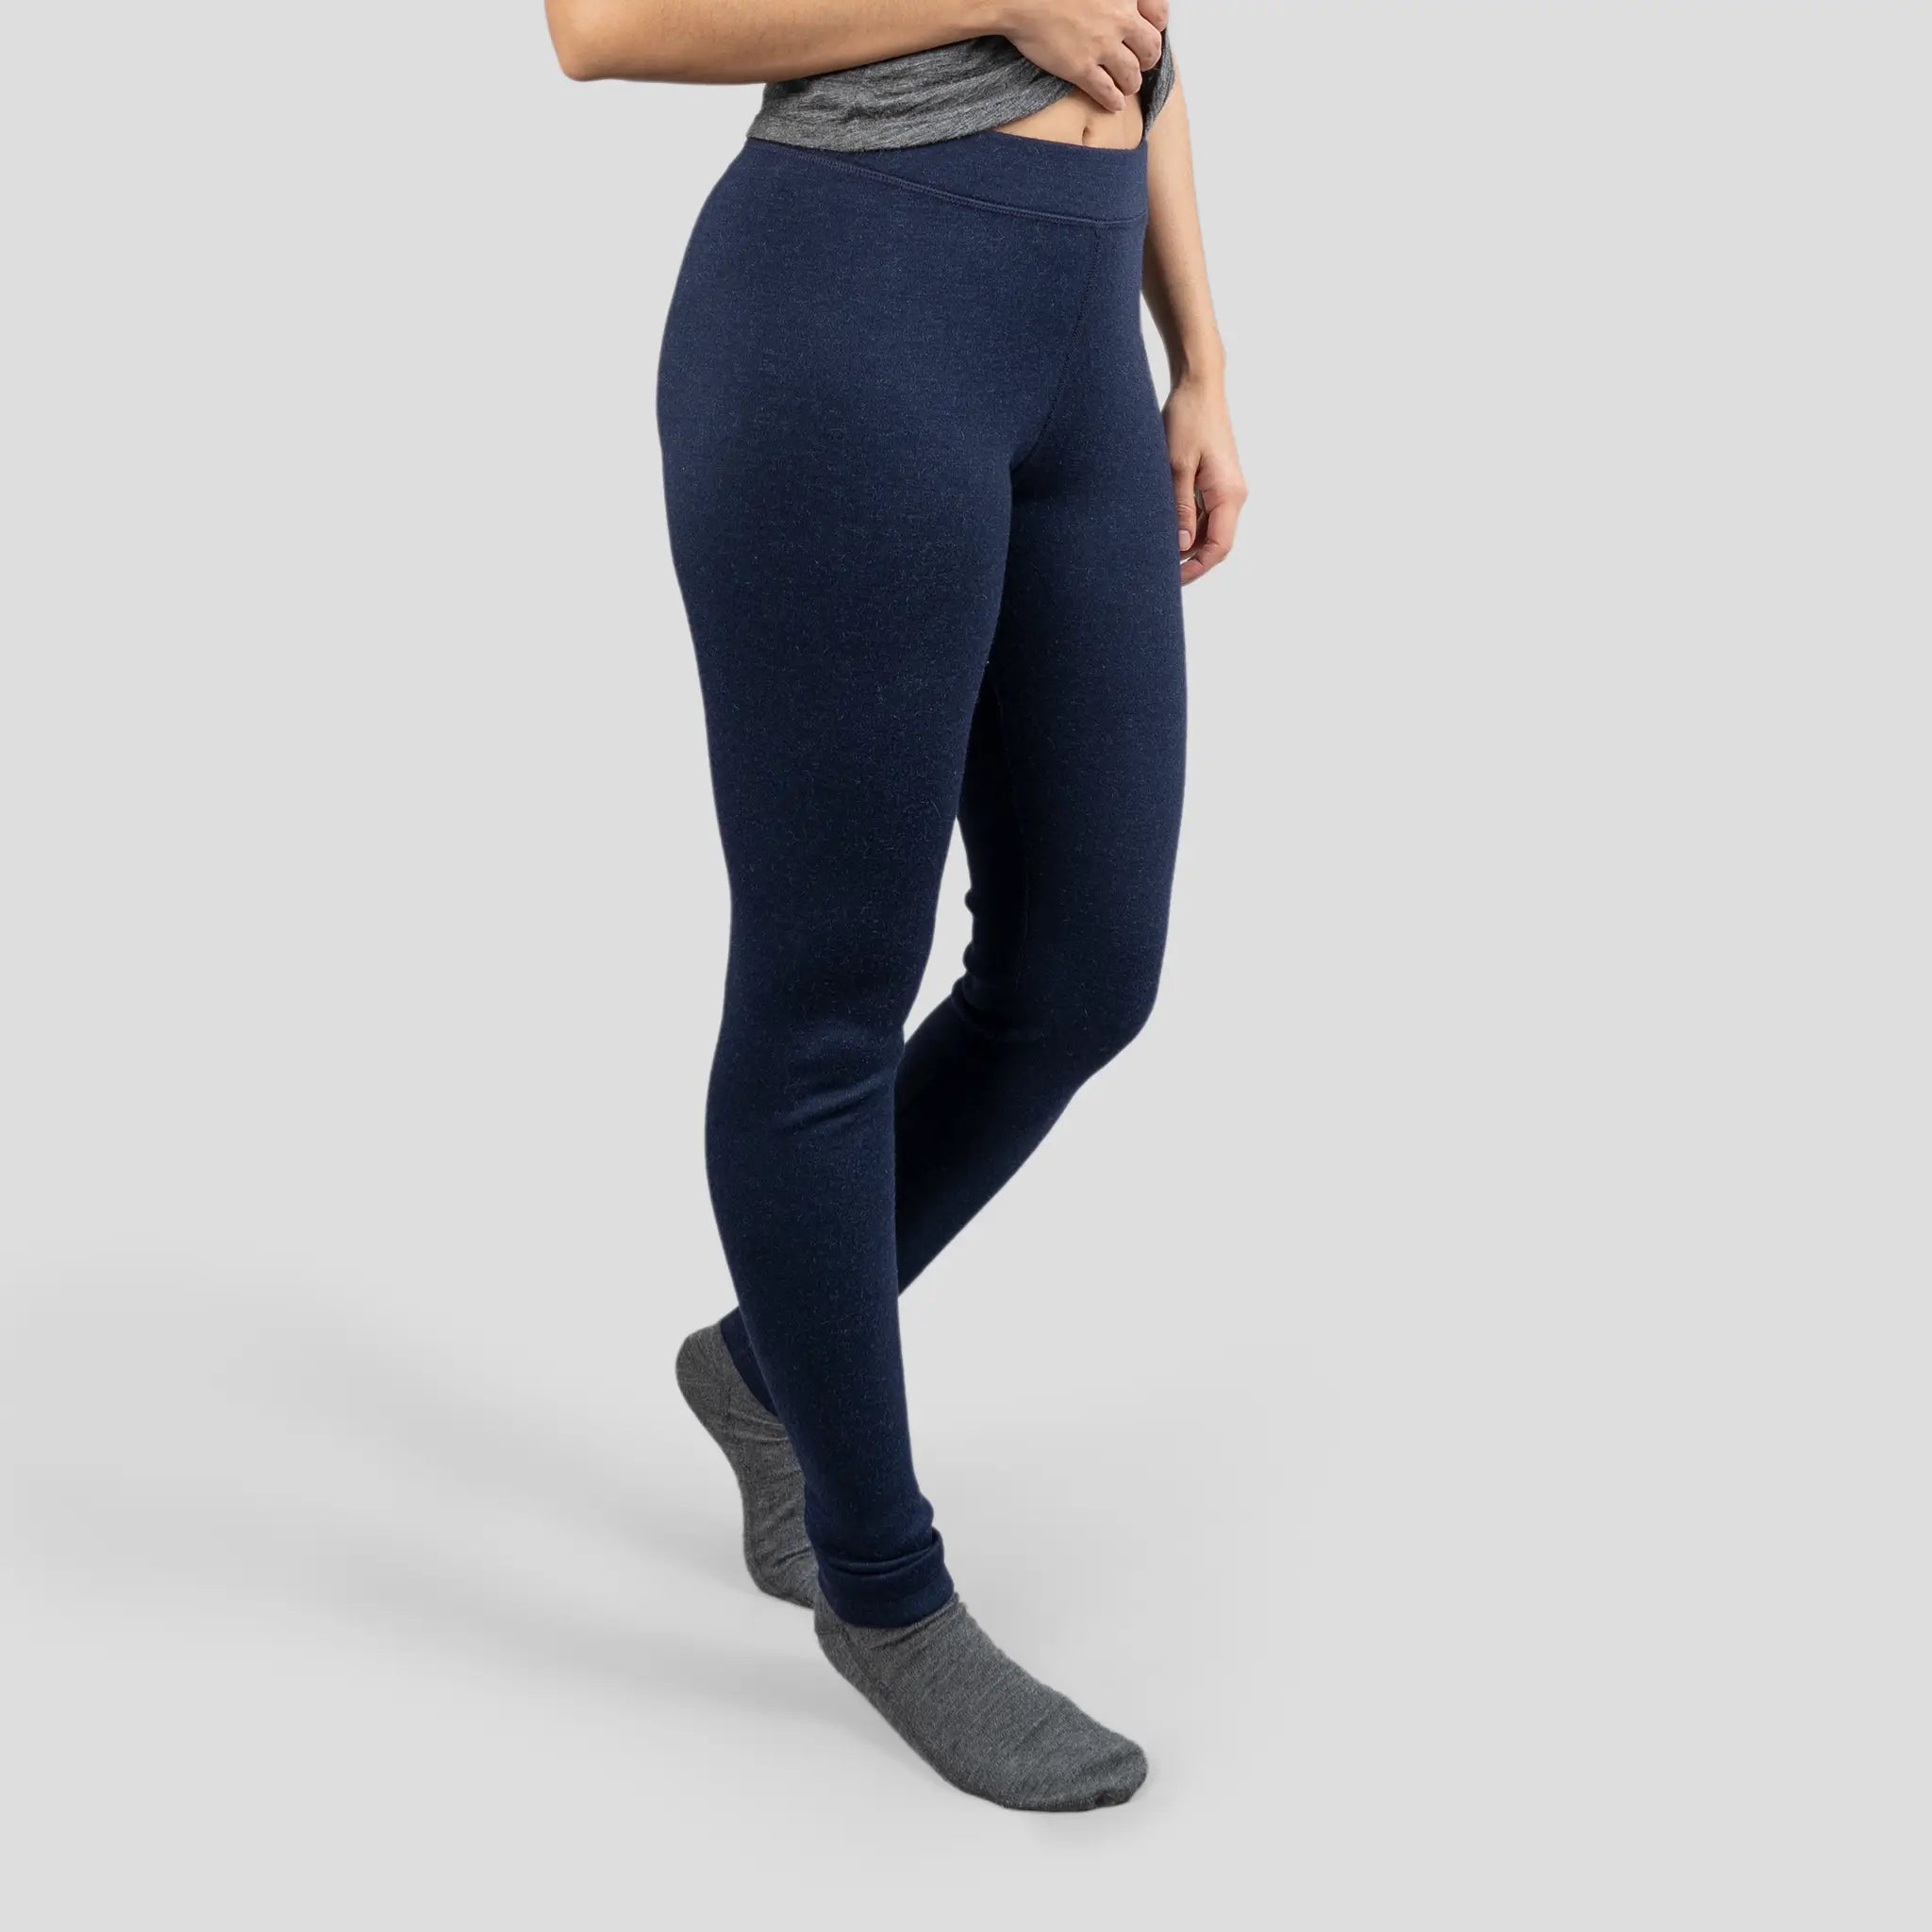 womens any activity wool leggings midweight color navy blue